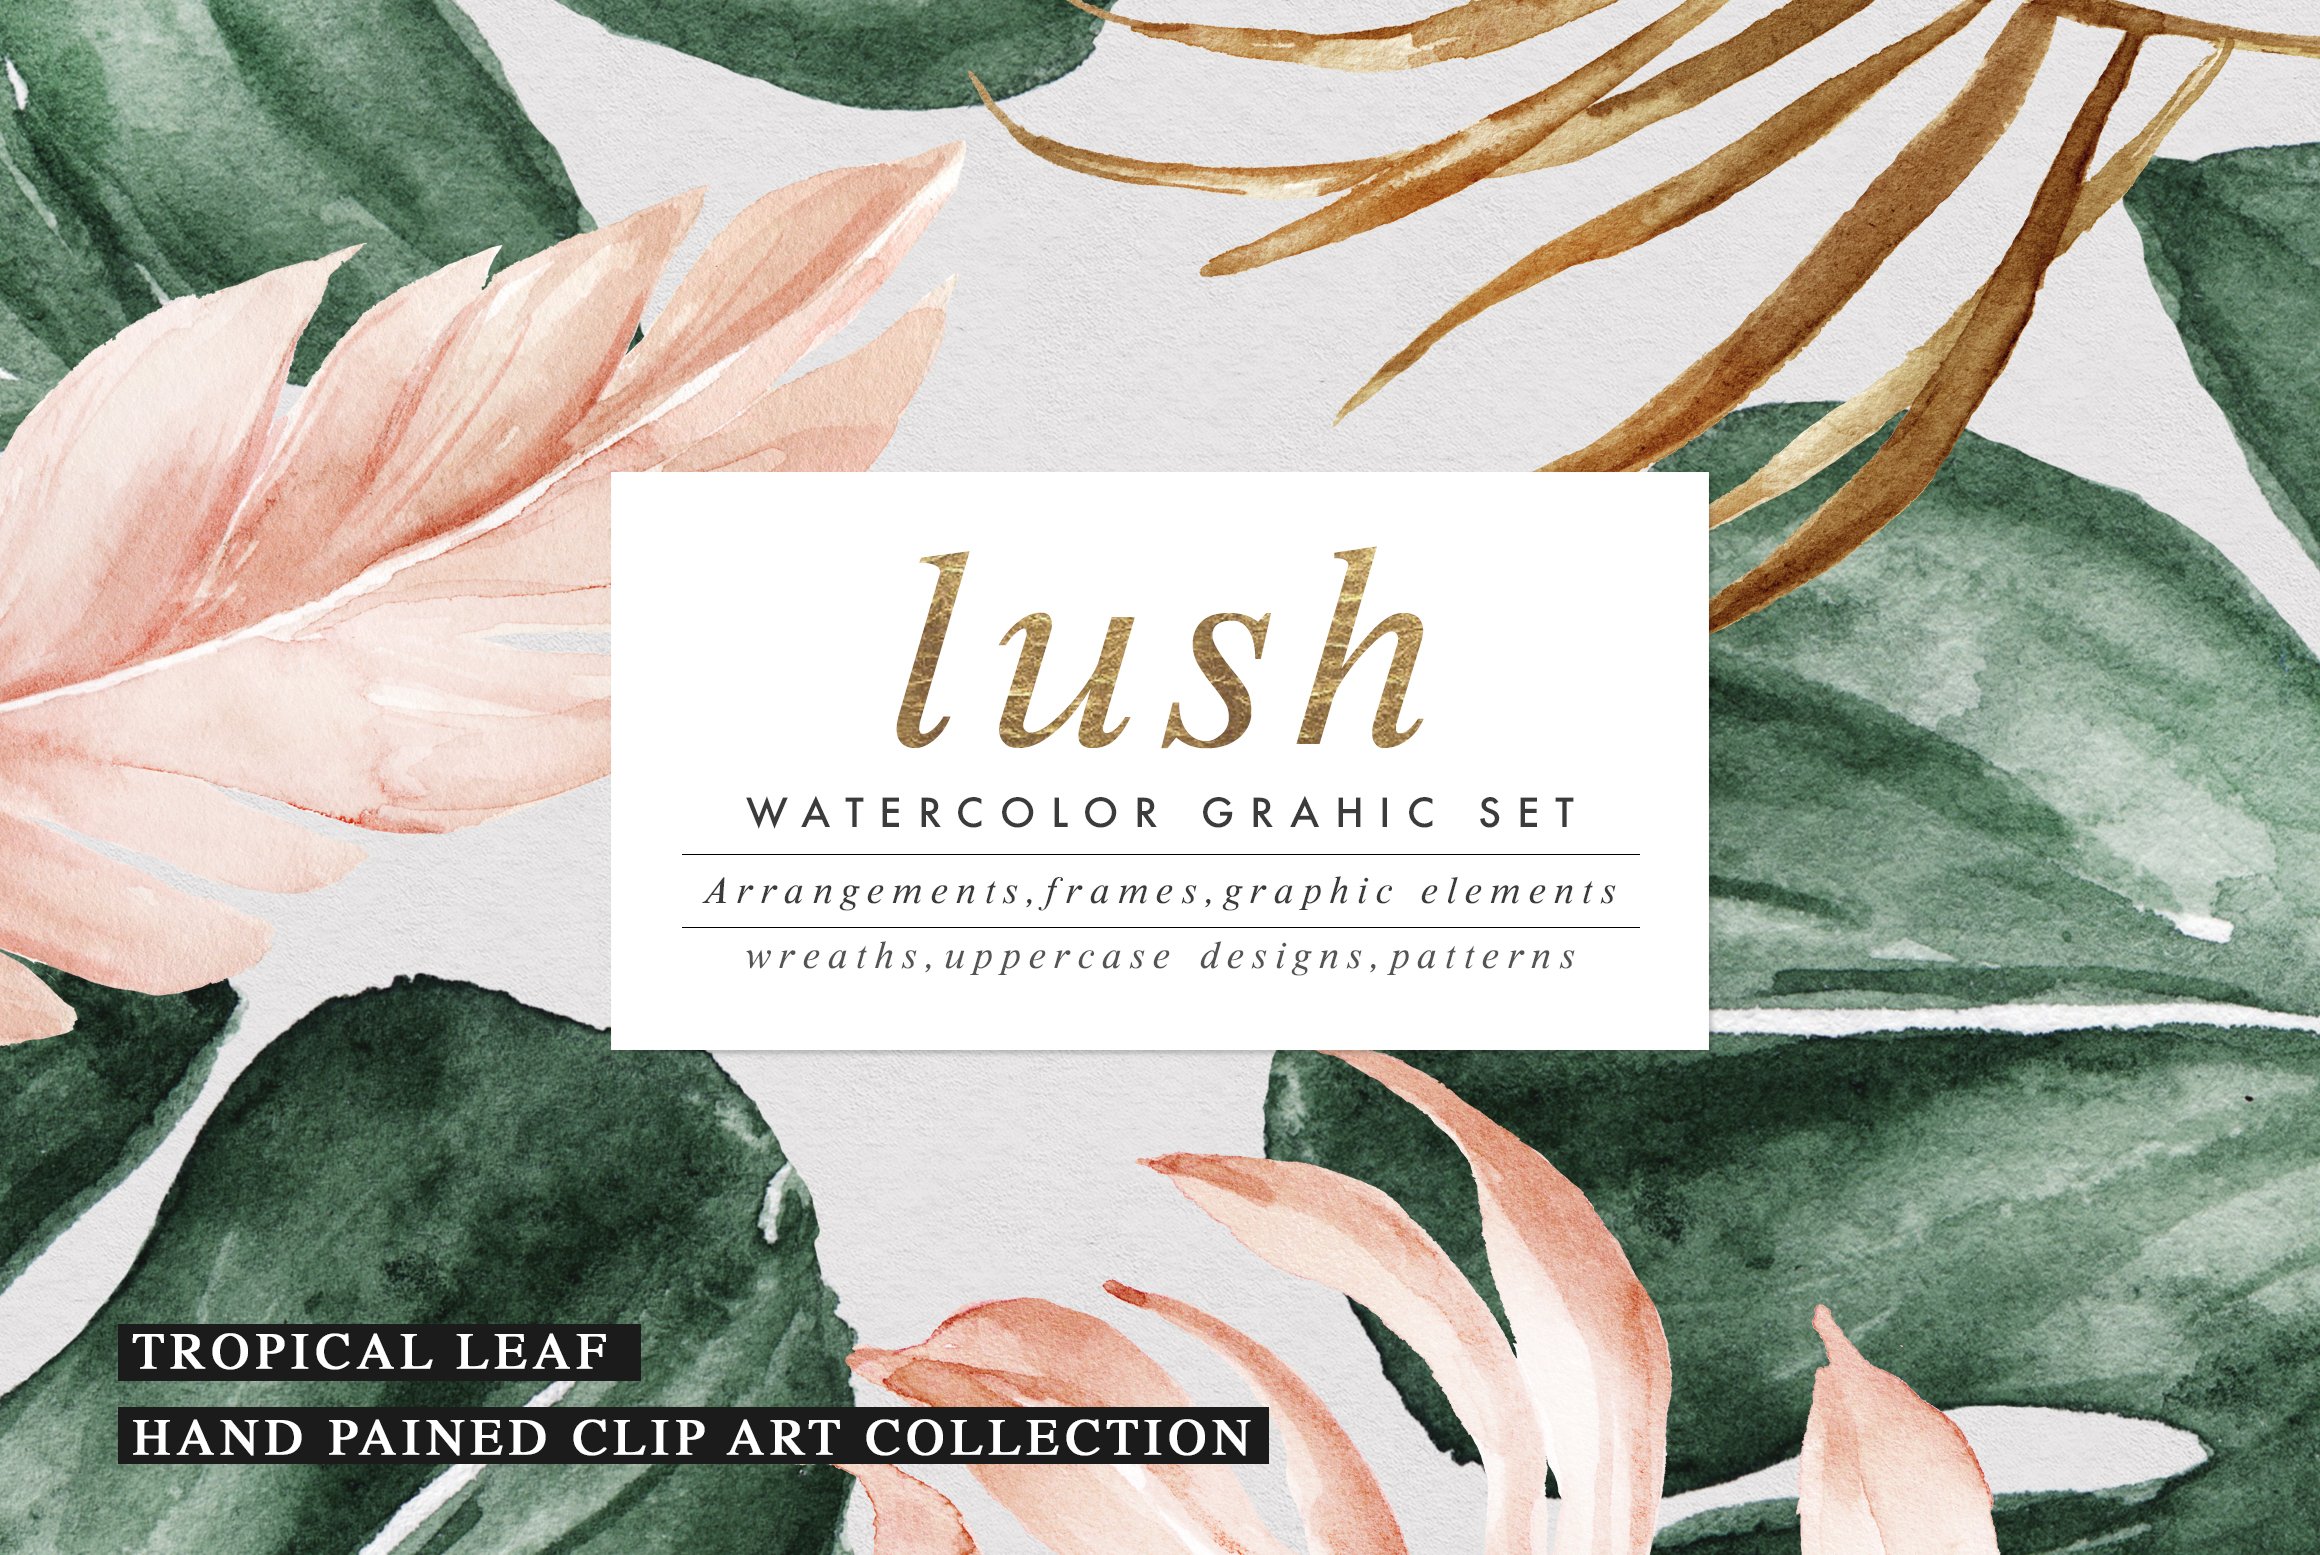 Lush-Summer Graphic Set cover image.